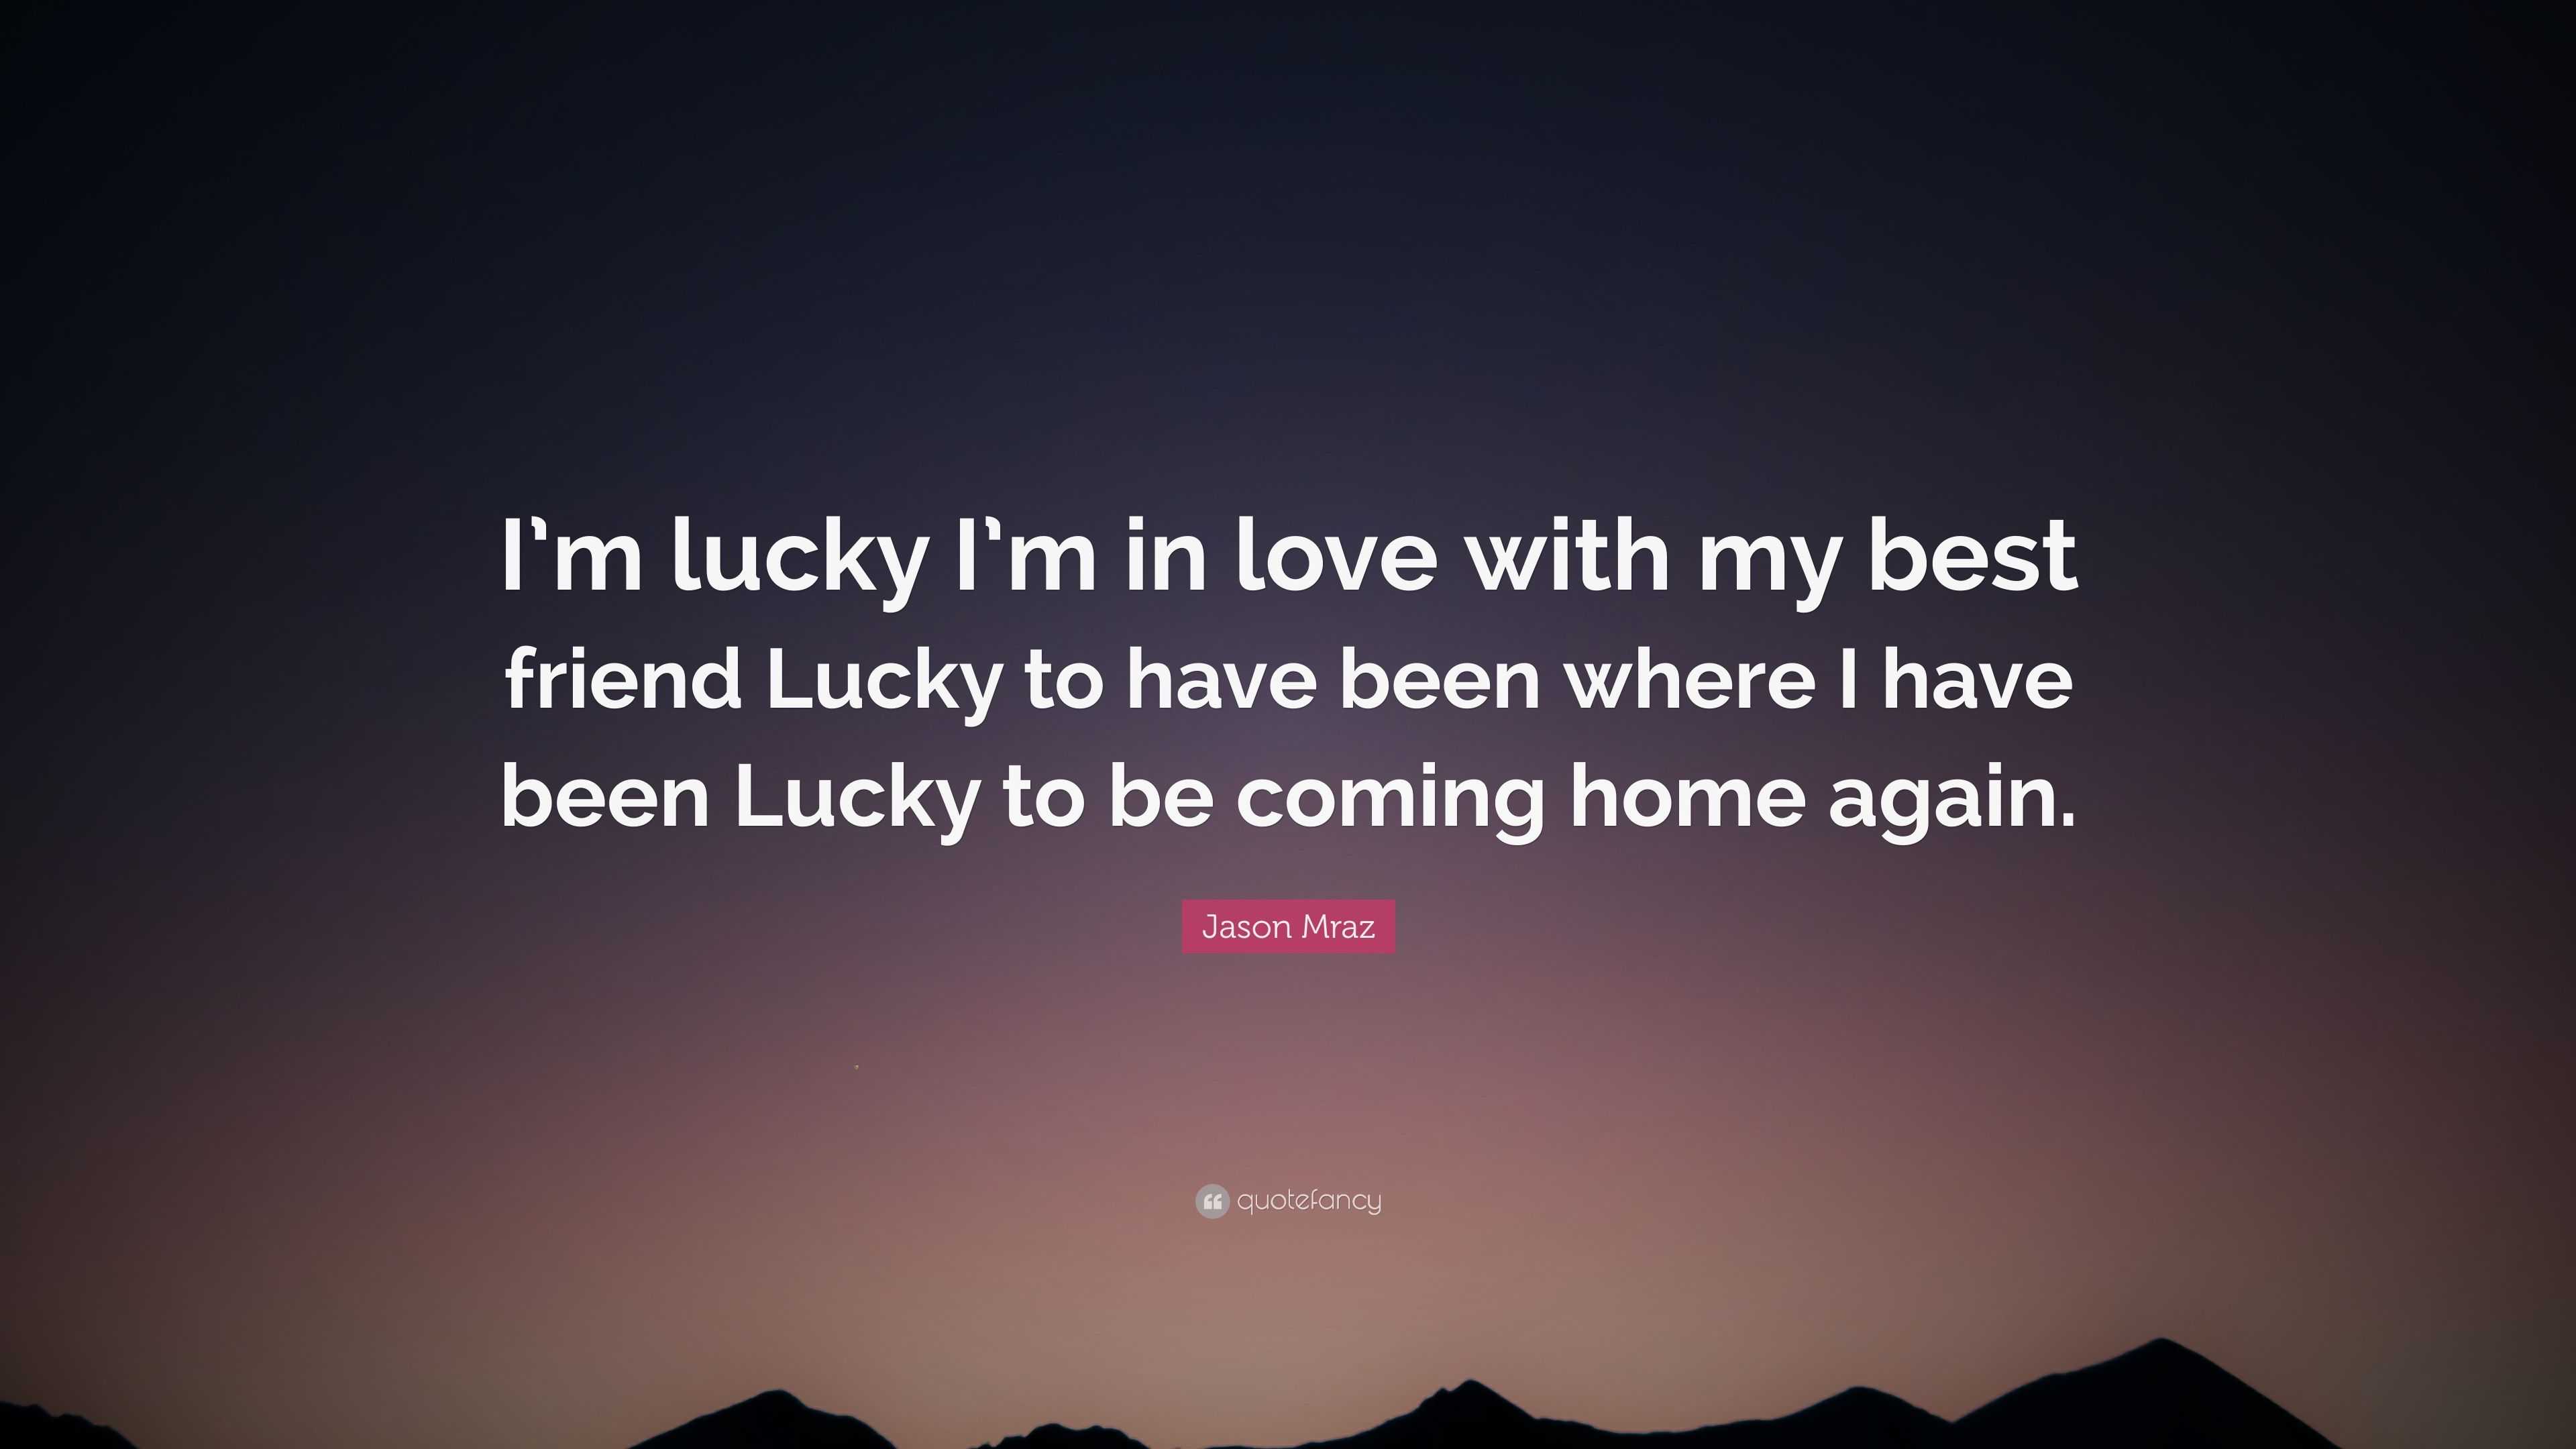 Jason Mraz Quote “I m lucky I m in love with my